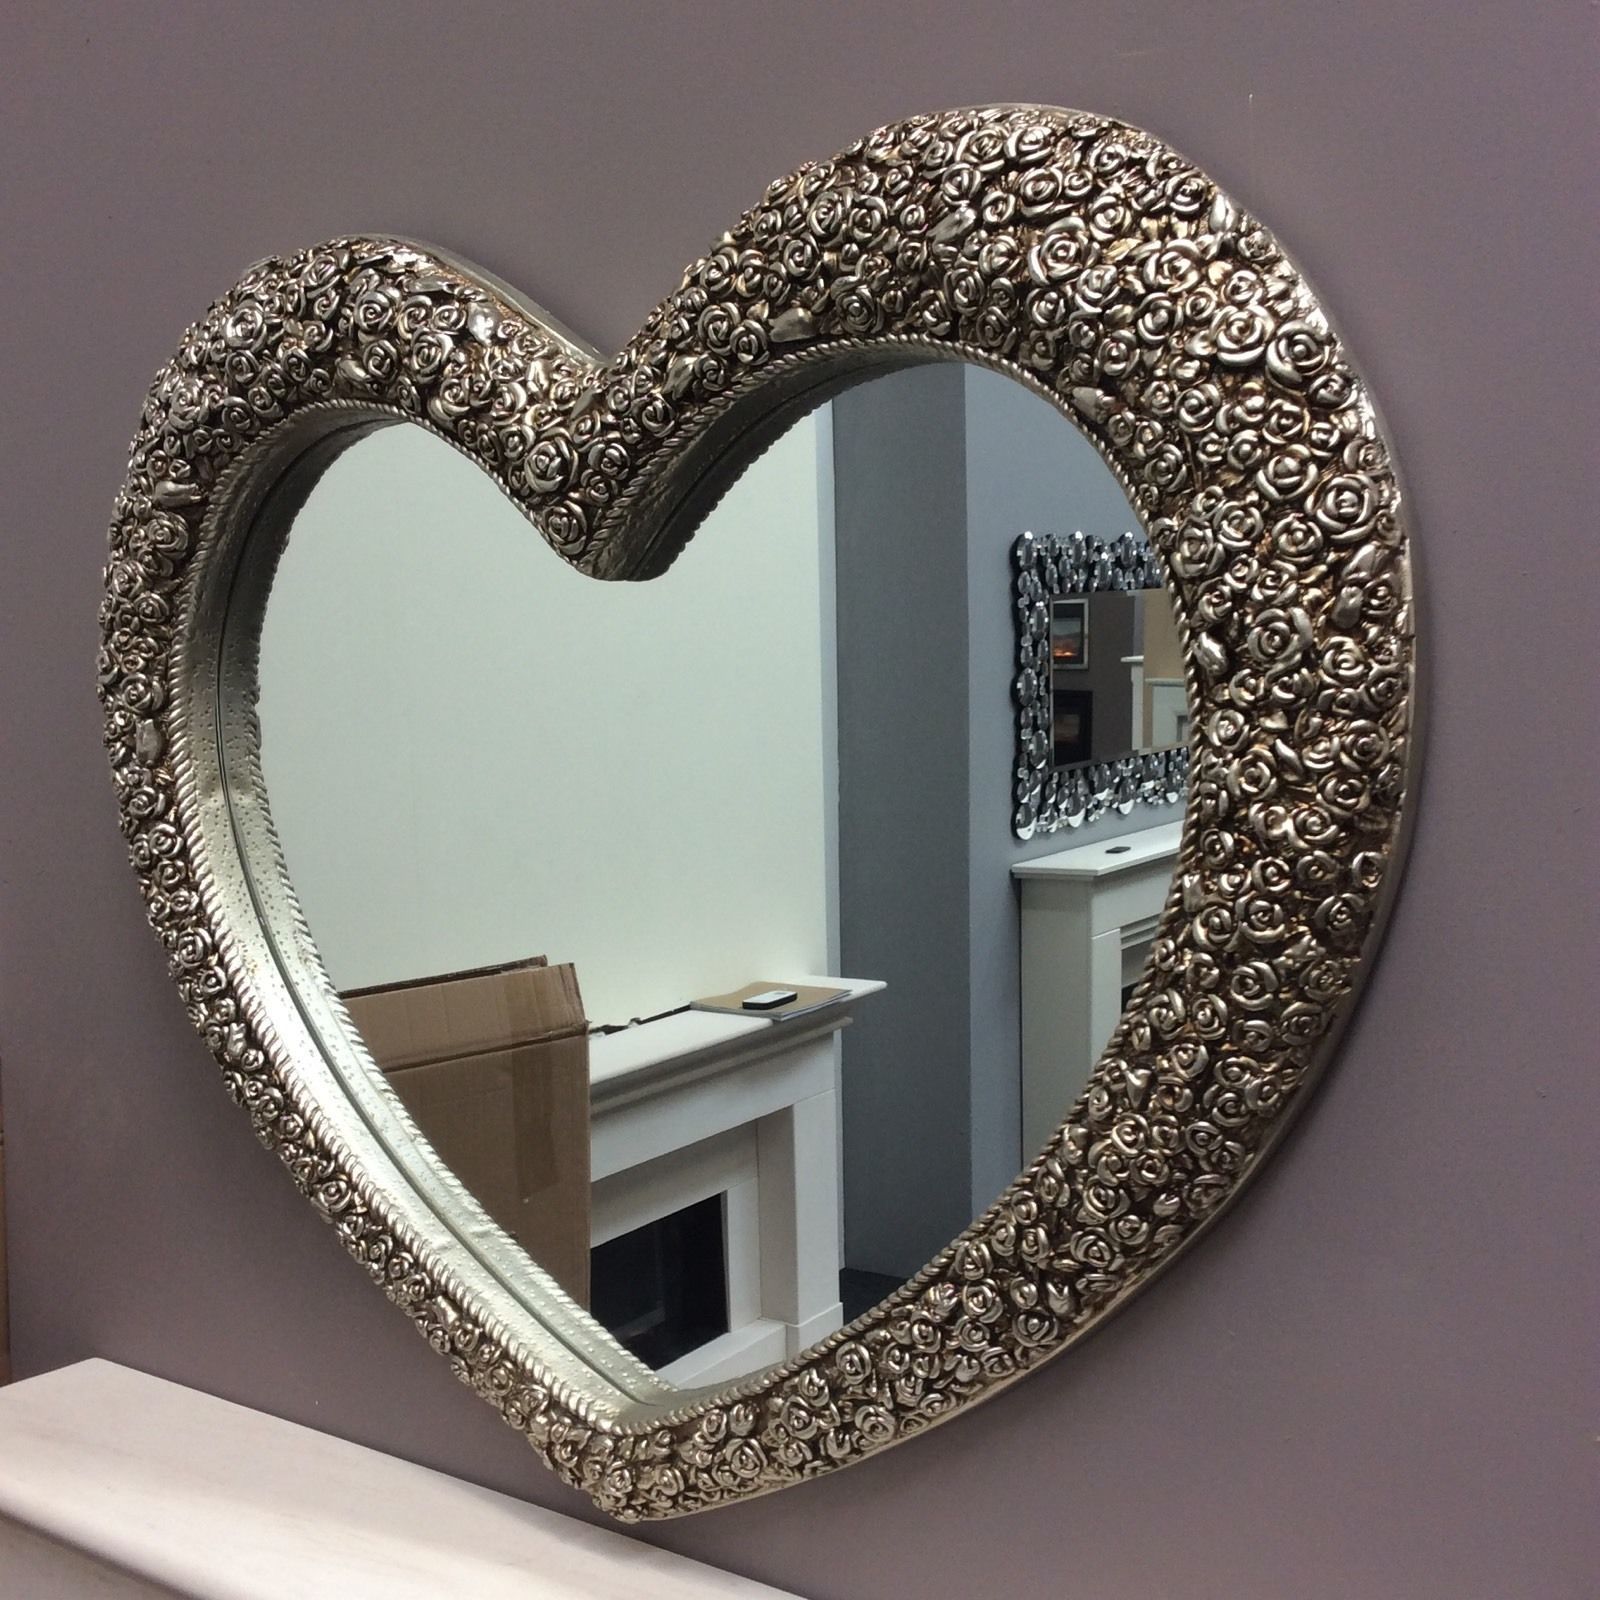 X Large Heart Mirror Stunning Ornate Elegant Mirror With Decorative Inside Accent Mirrors (View 3 of 15)